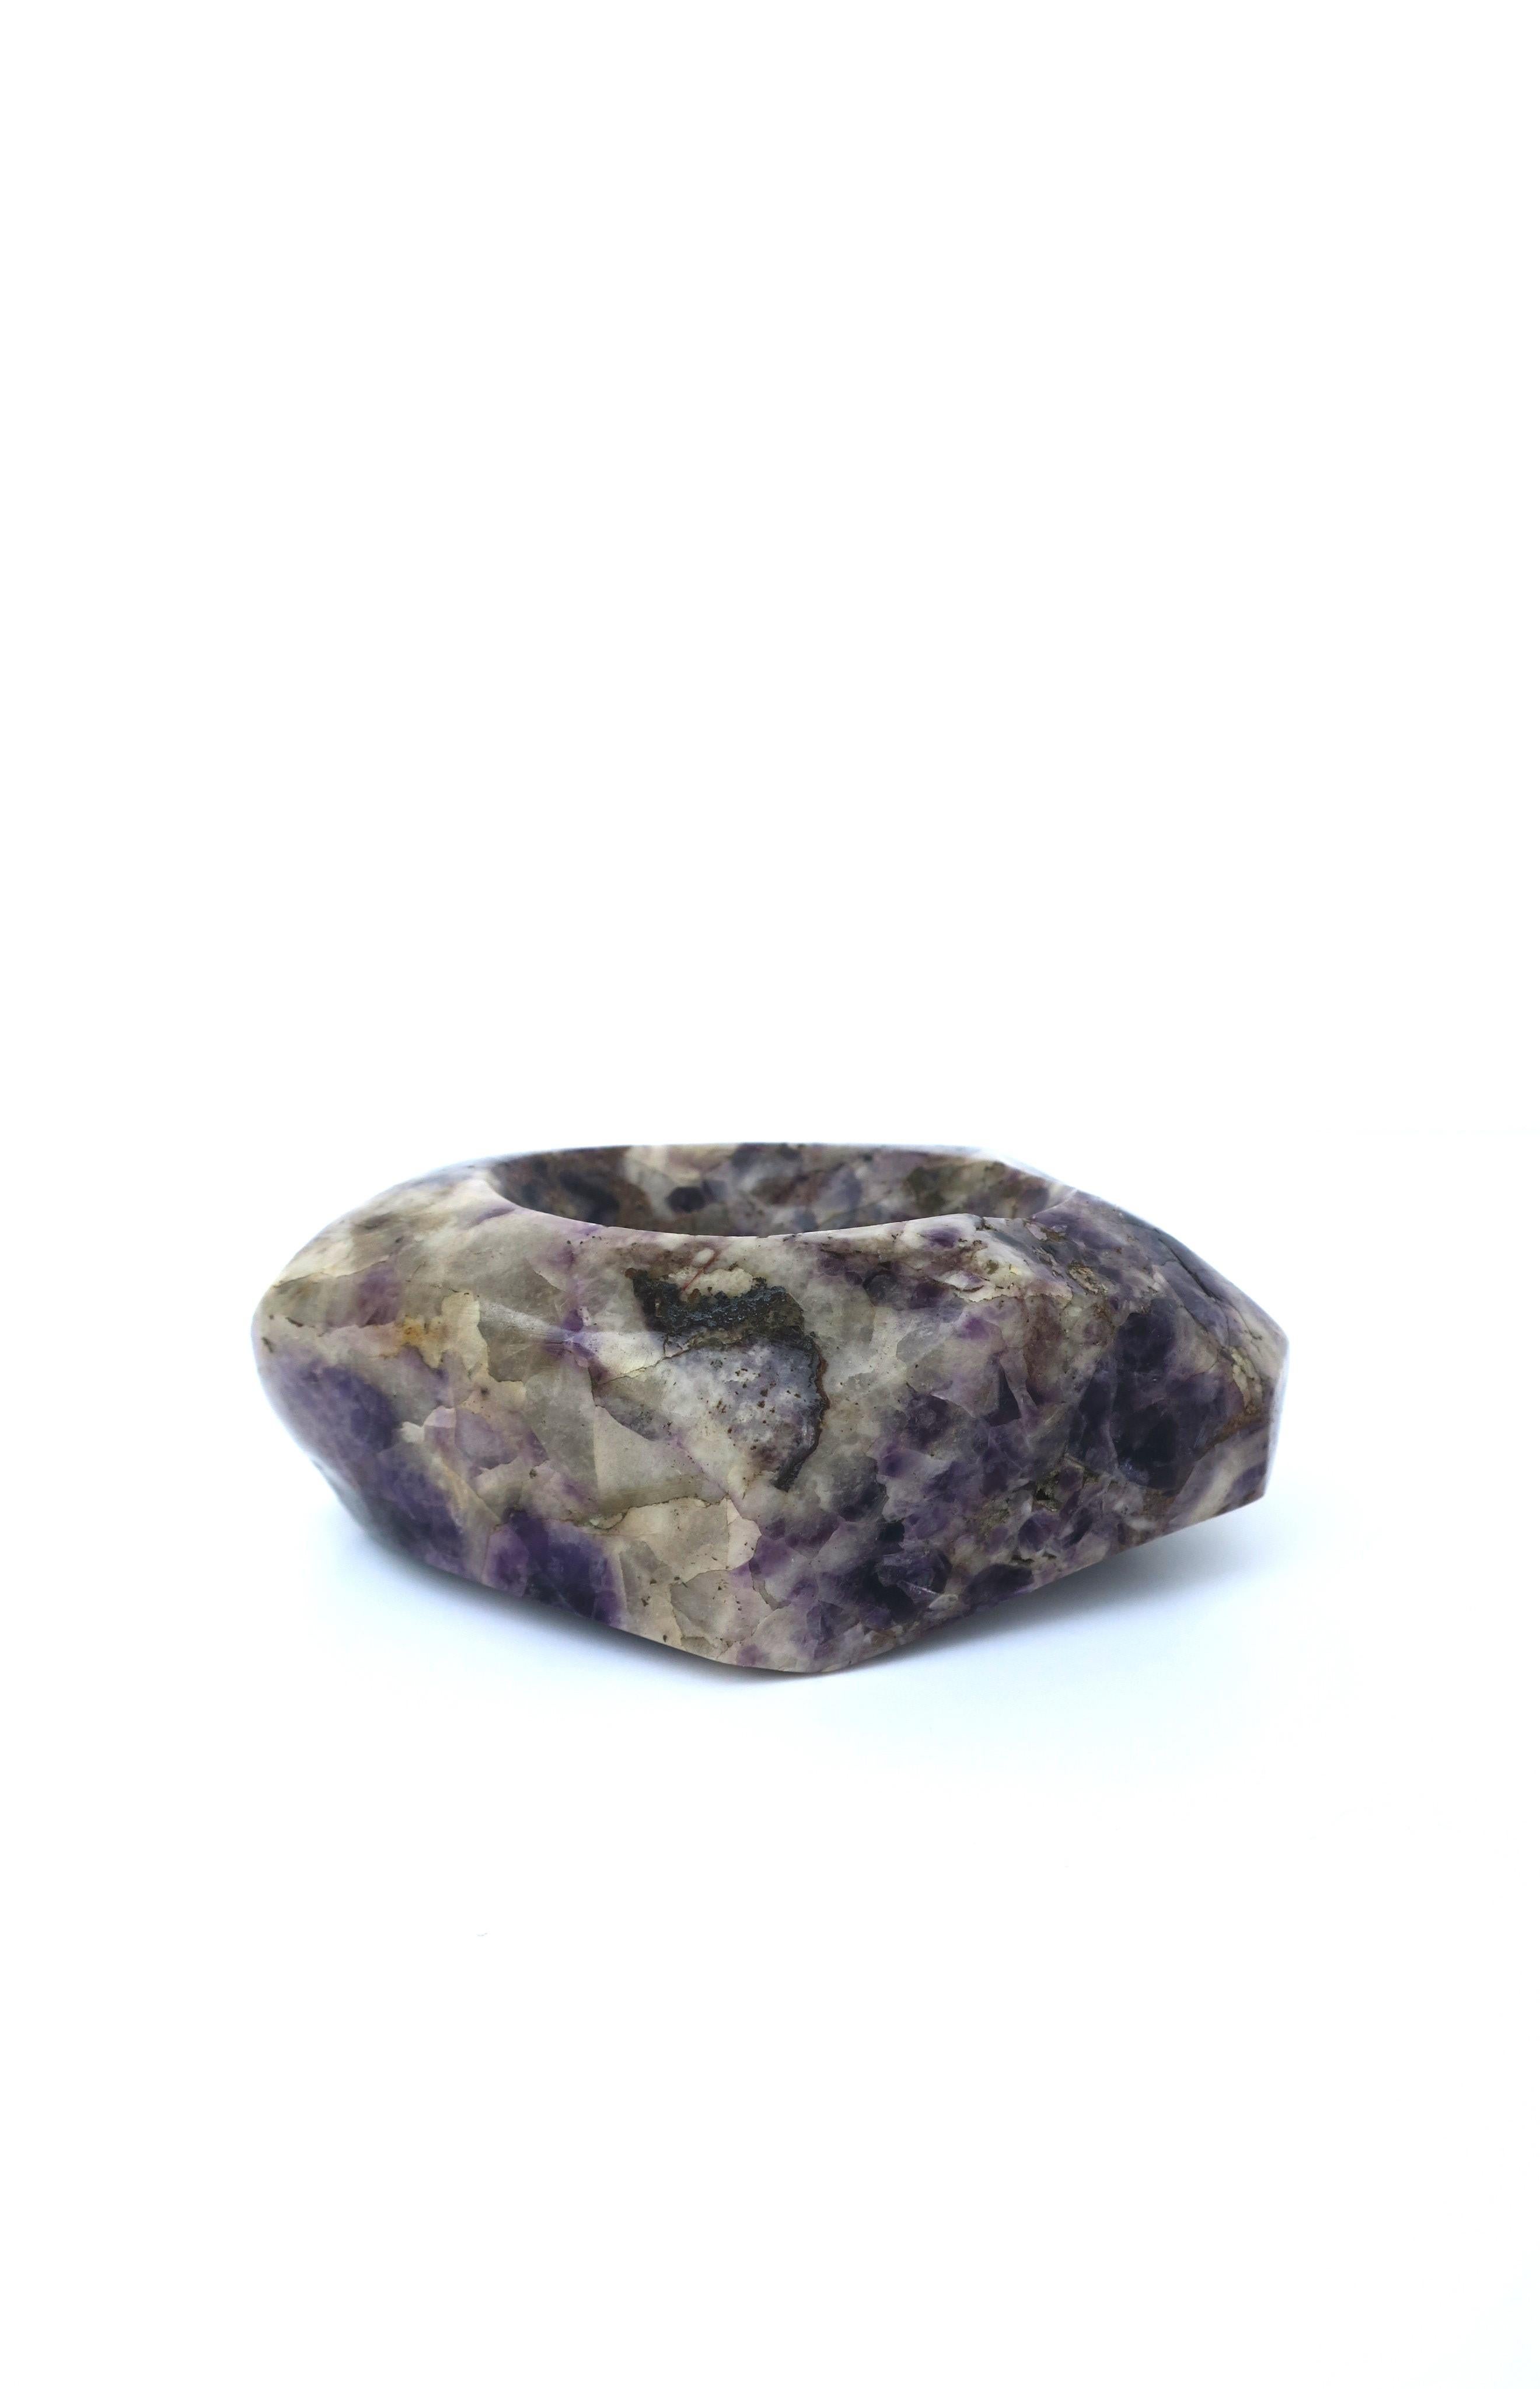 Amythyst Purple and White Stone Jewelry Dish Vide-Poche For Sale 4